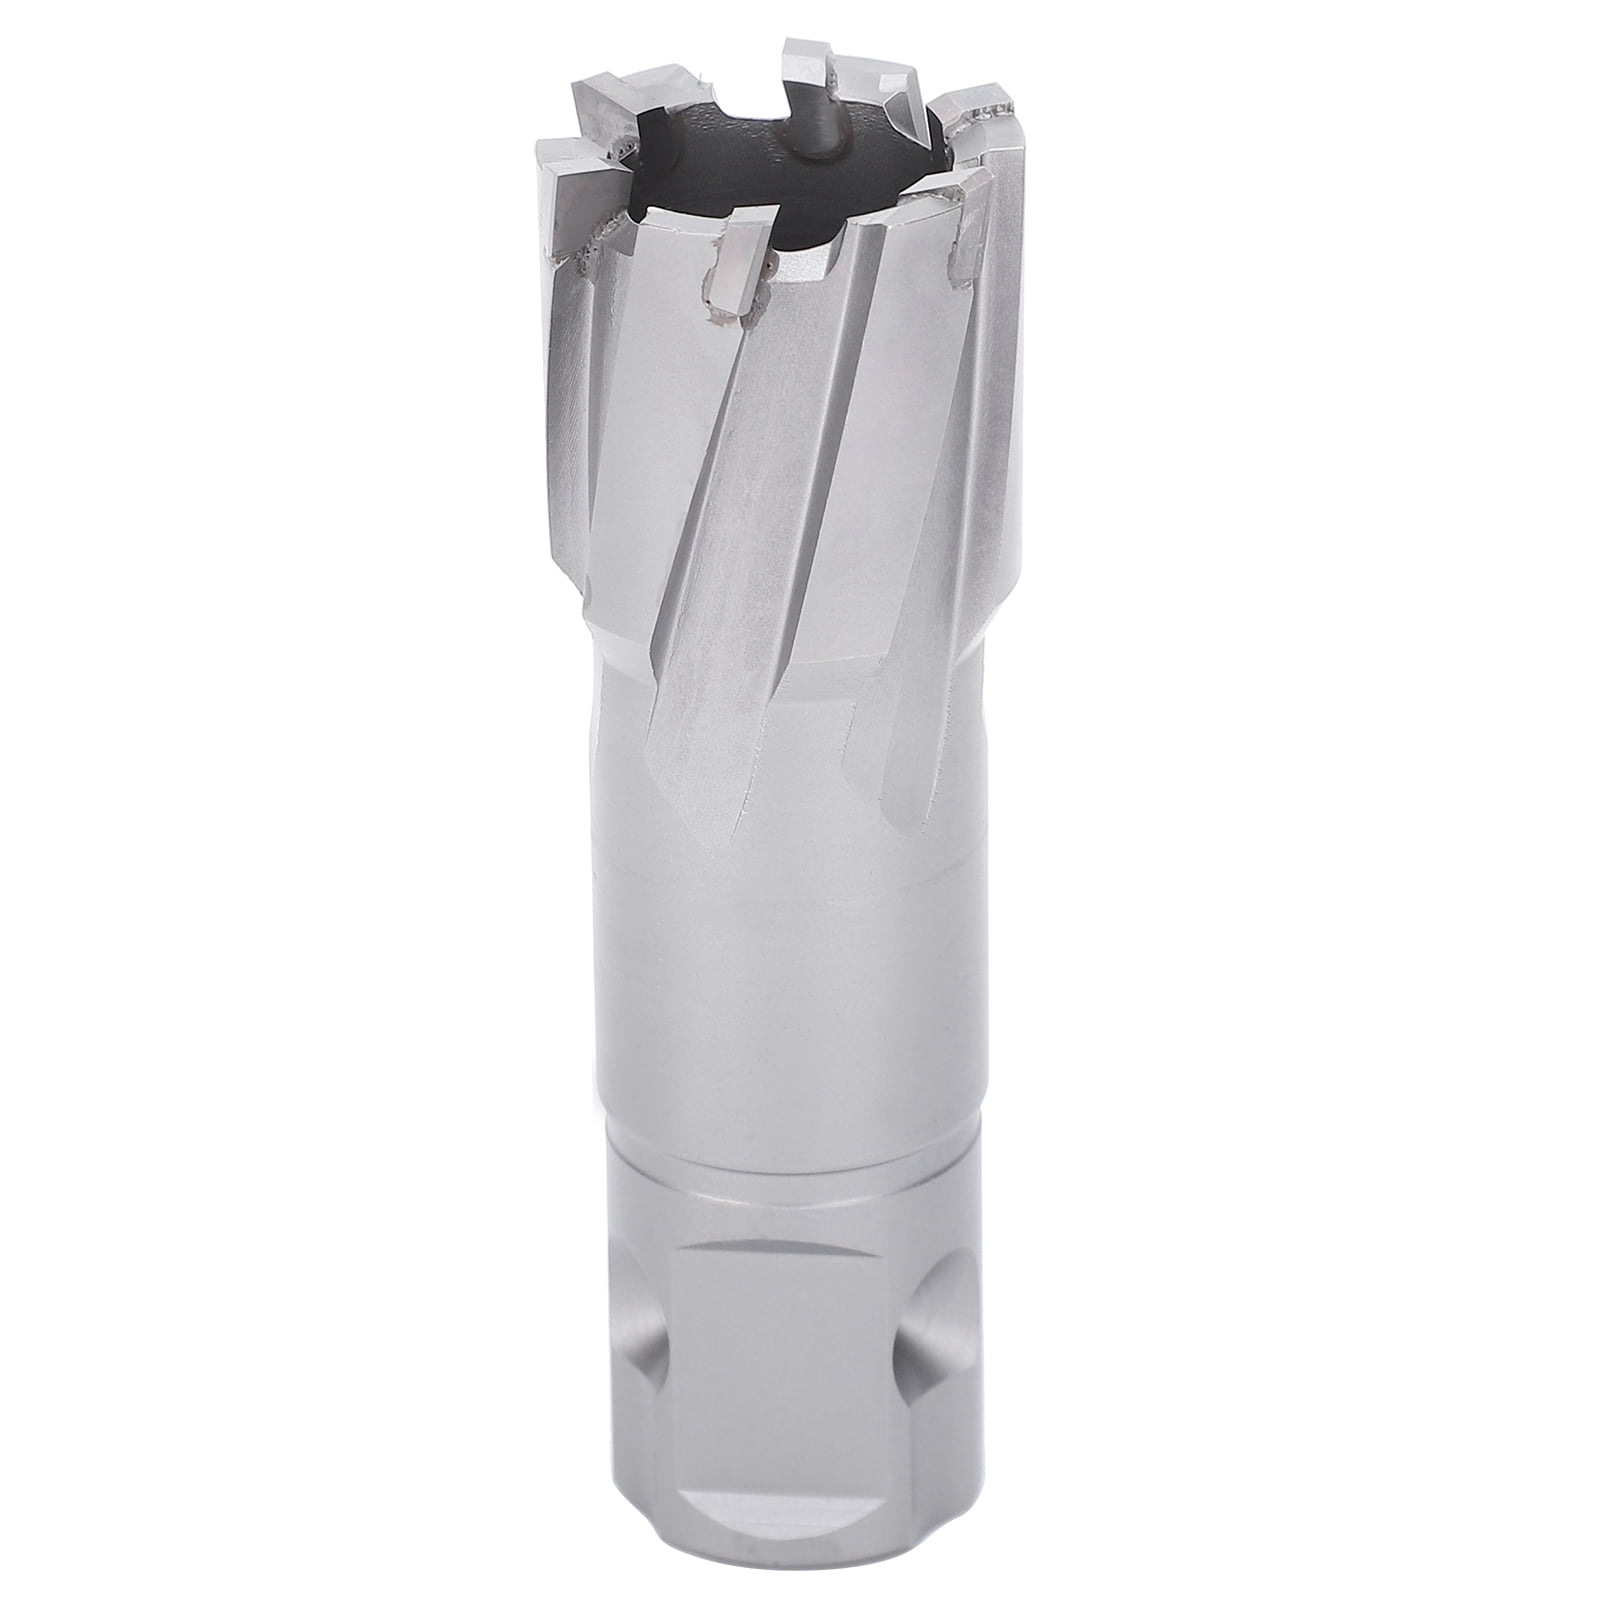 24-35mm Core Drill Bit Hollow Universal Shank for Metal Plate Drilling Tools Core Drill Carbide 